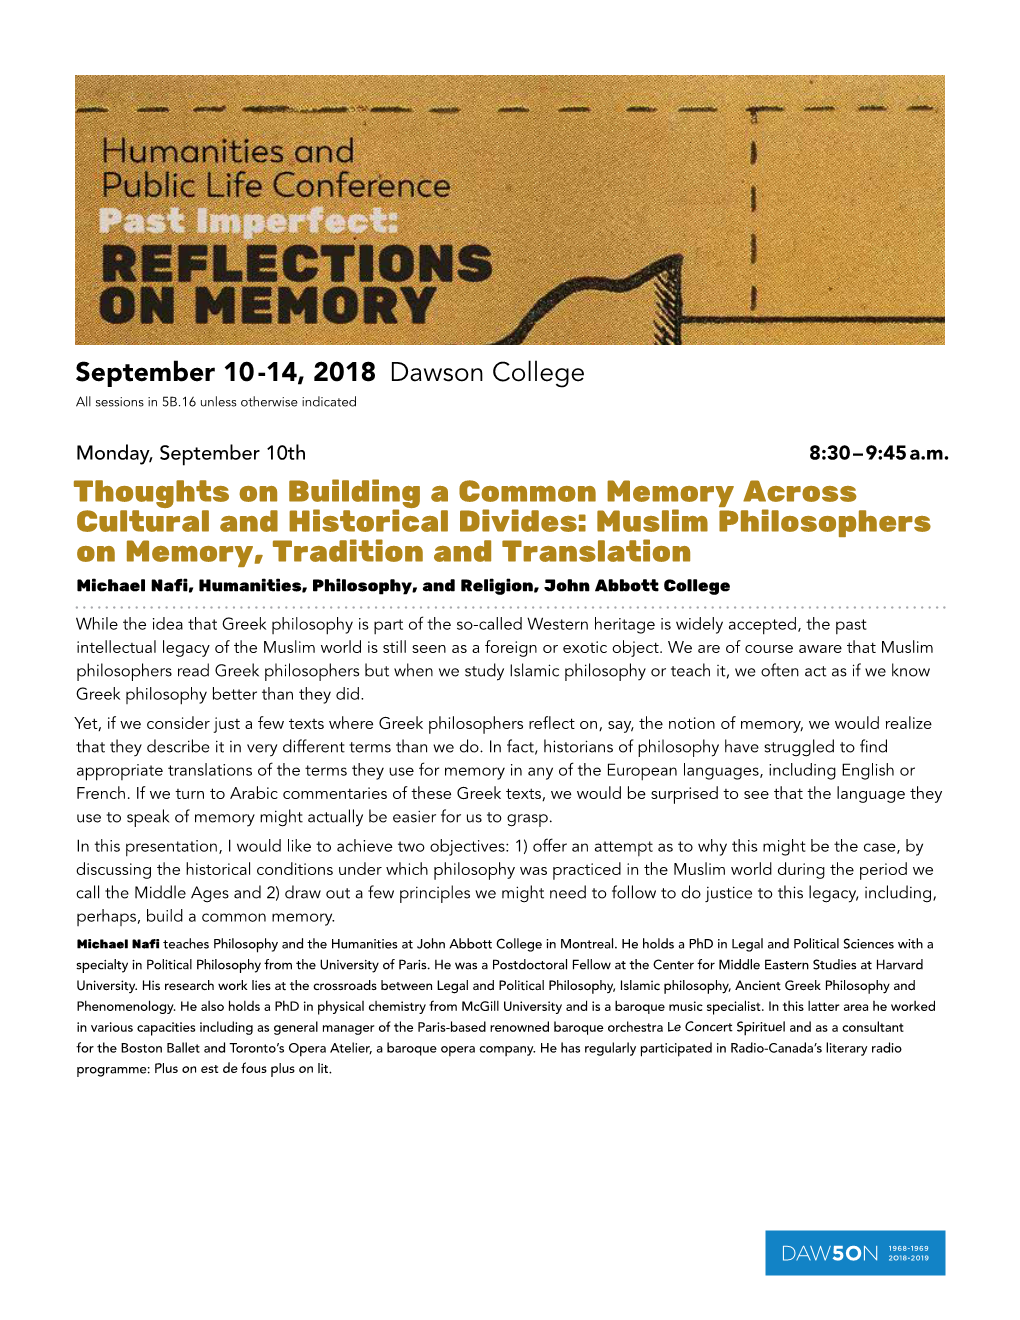 Muslim Philosophers on Memory, Tradition and Translation Michael Nafi, Humanities, Philosophy, and Religion, John Abbott College